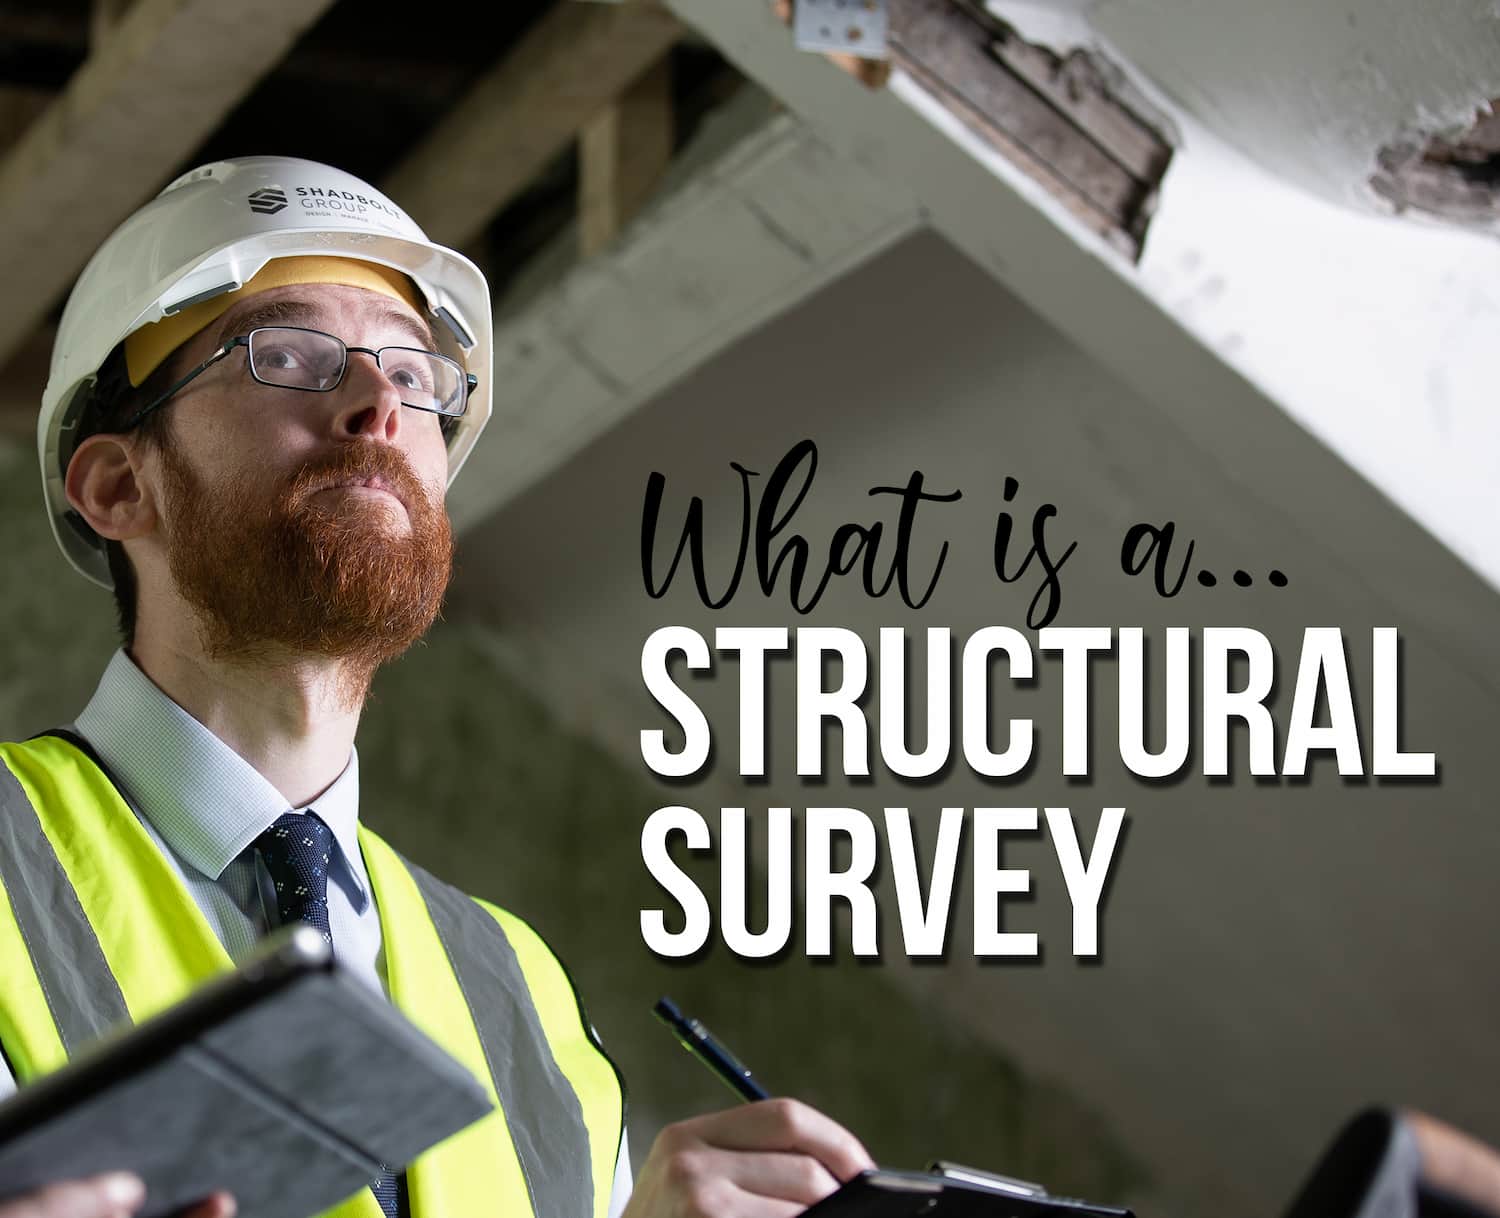 Which of the following is not a suggestion for survey construction?